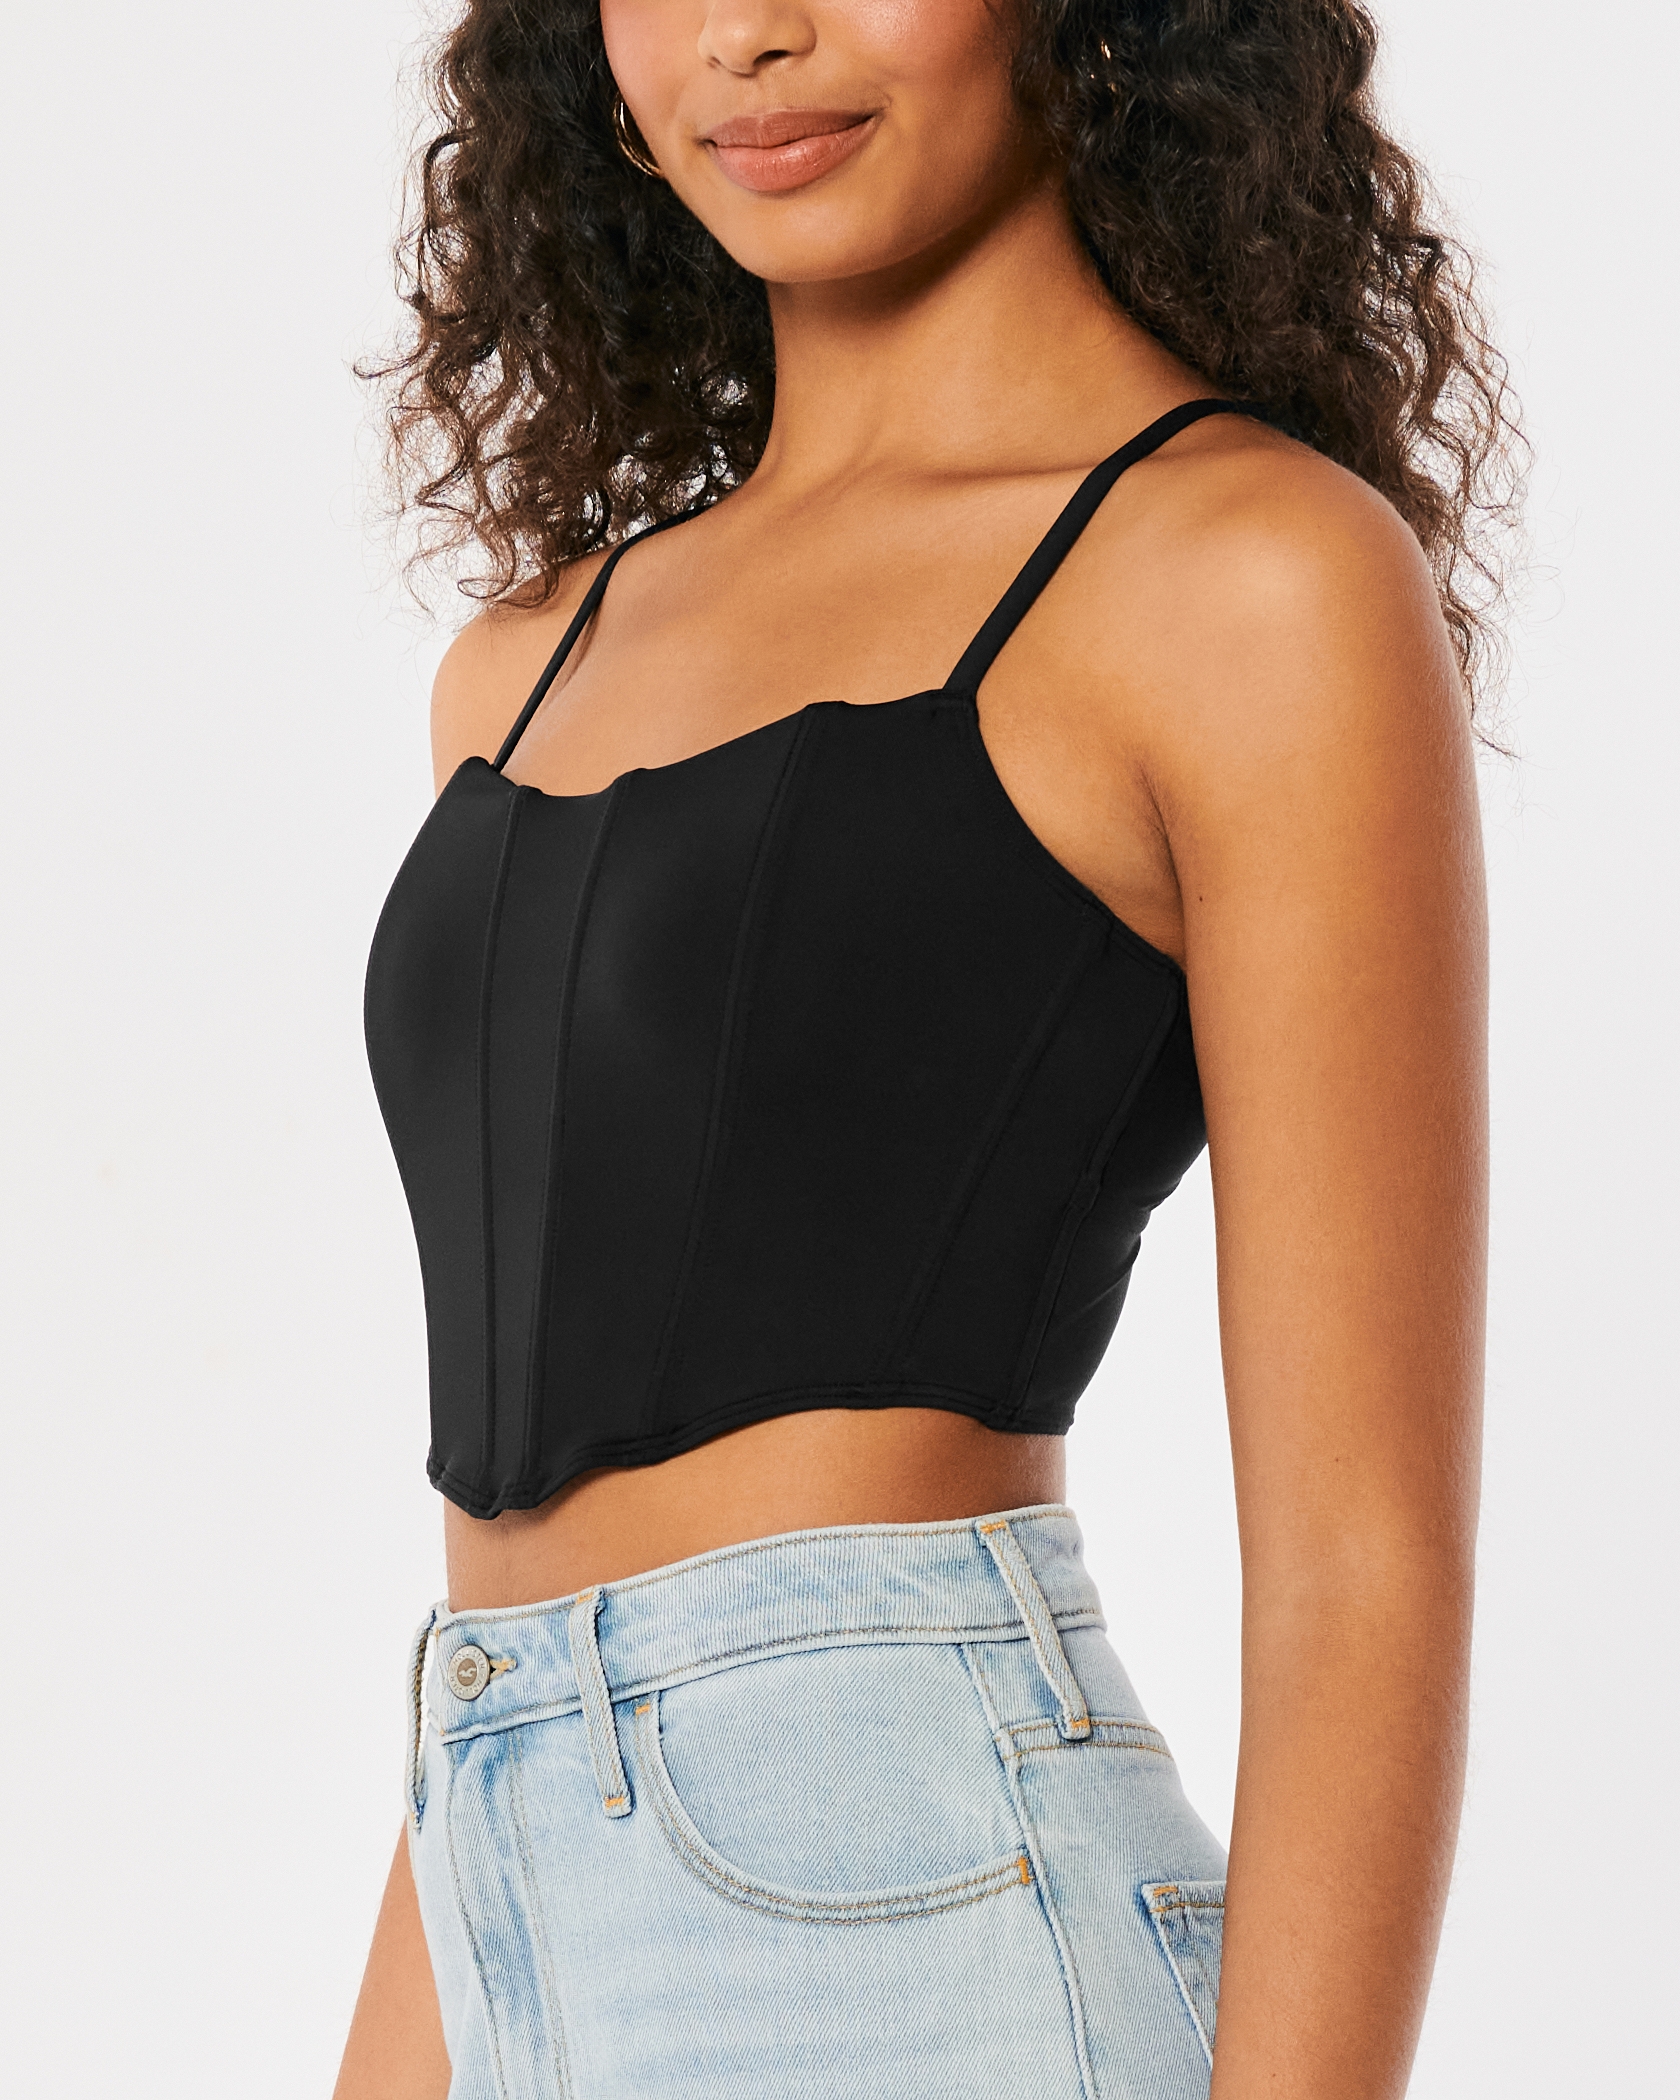 Hollister Halter Top With Built-In Bra - $10 - From stella